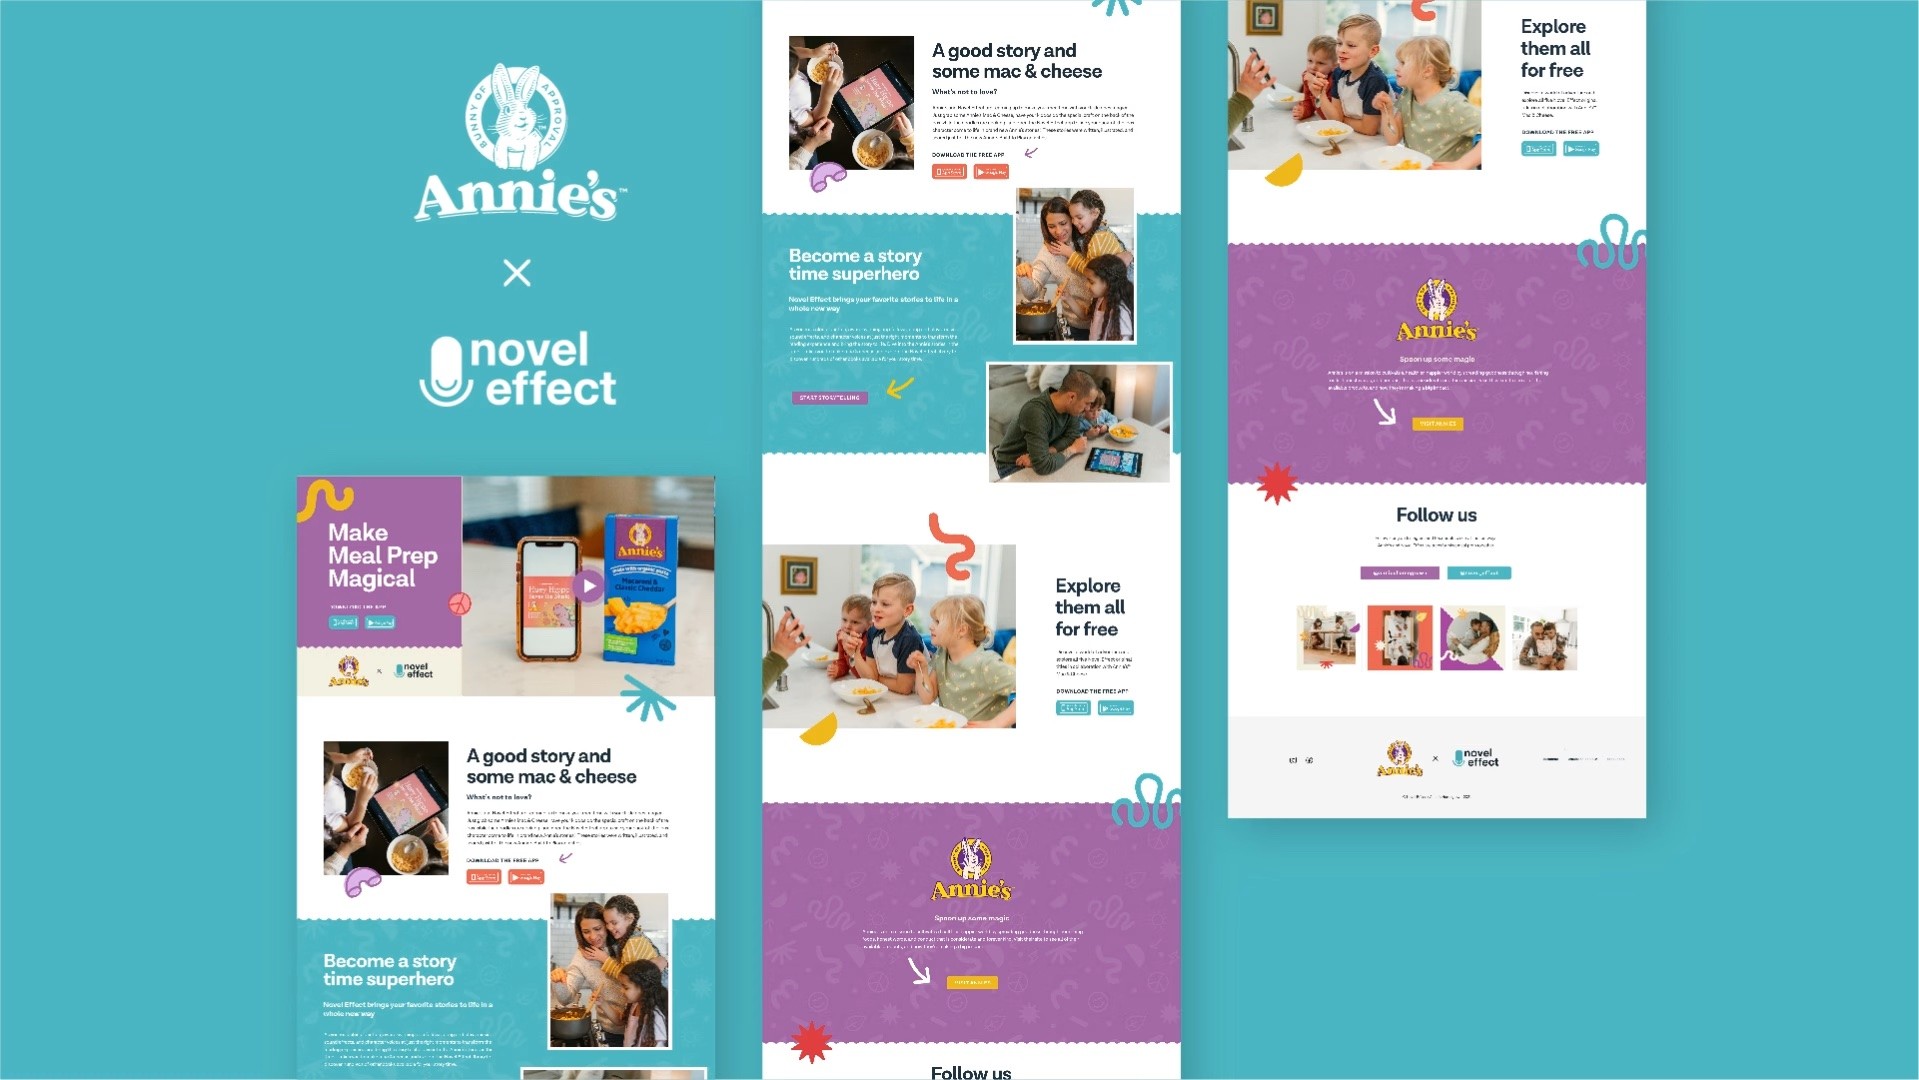 Annies + Novel Effect Covers